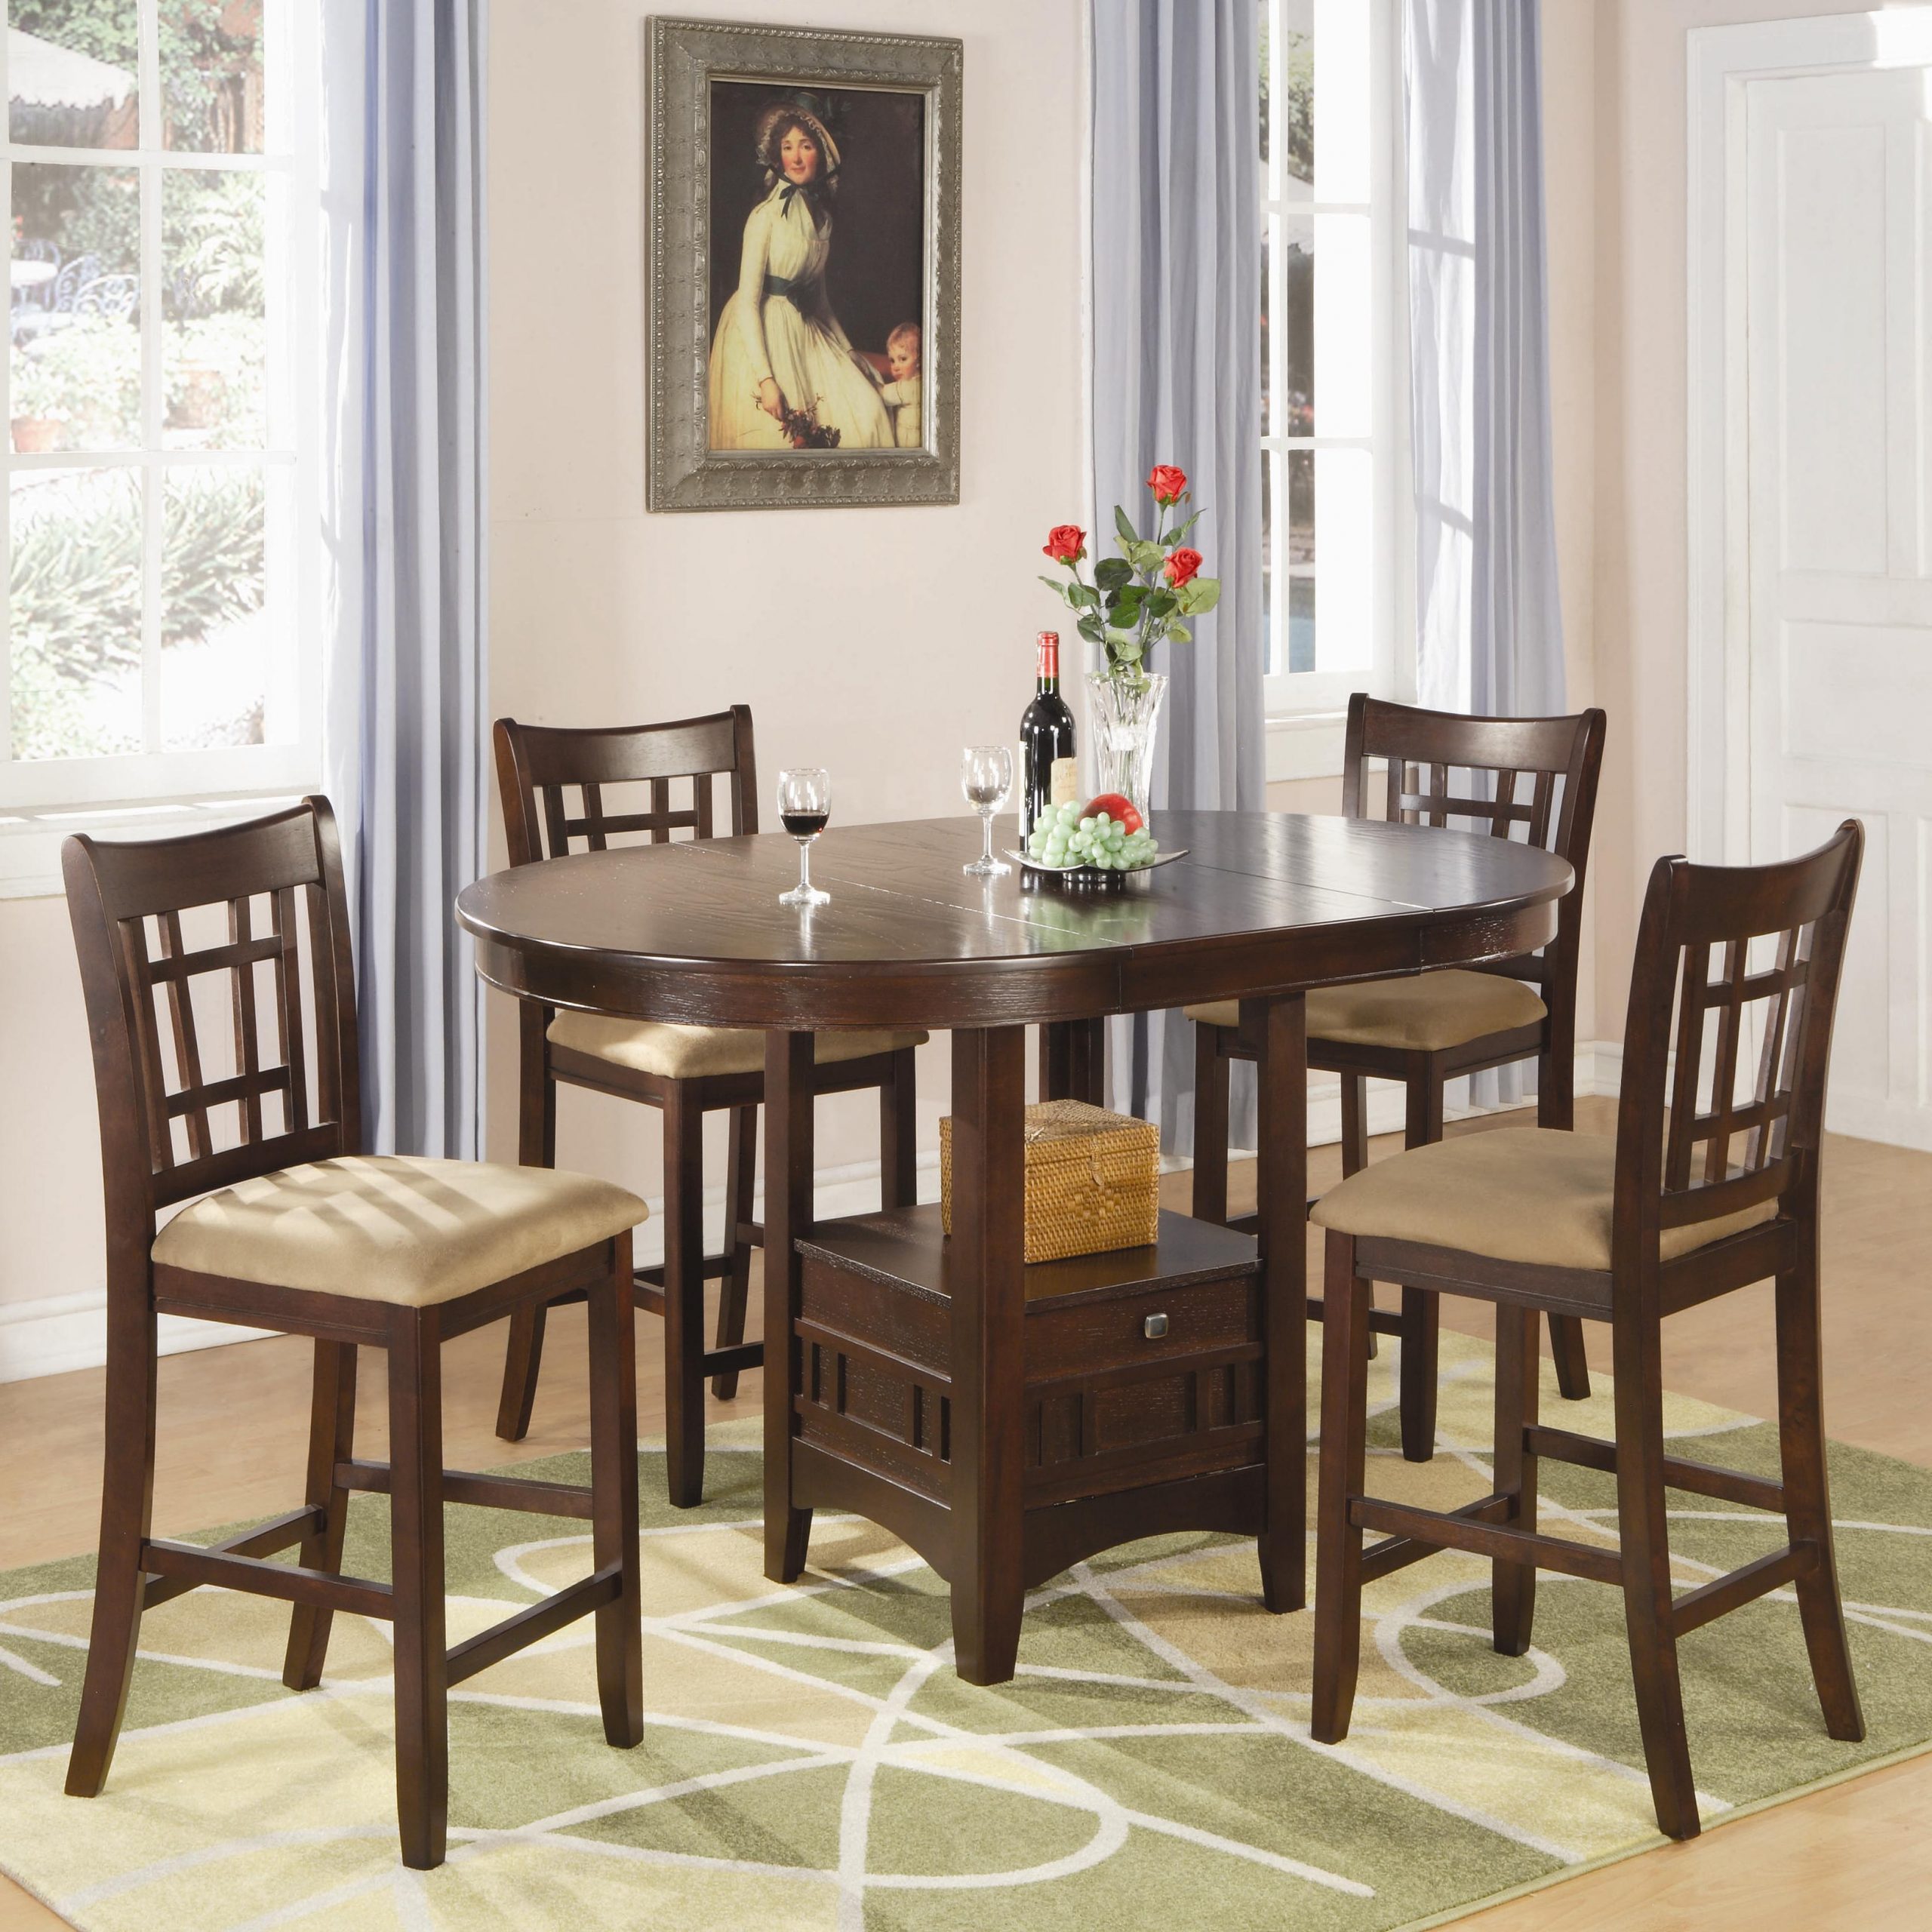 Lavon 5 Piece Counter Table And Chair Set with dimensions 3256 X 3256